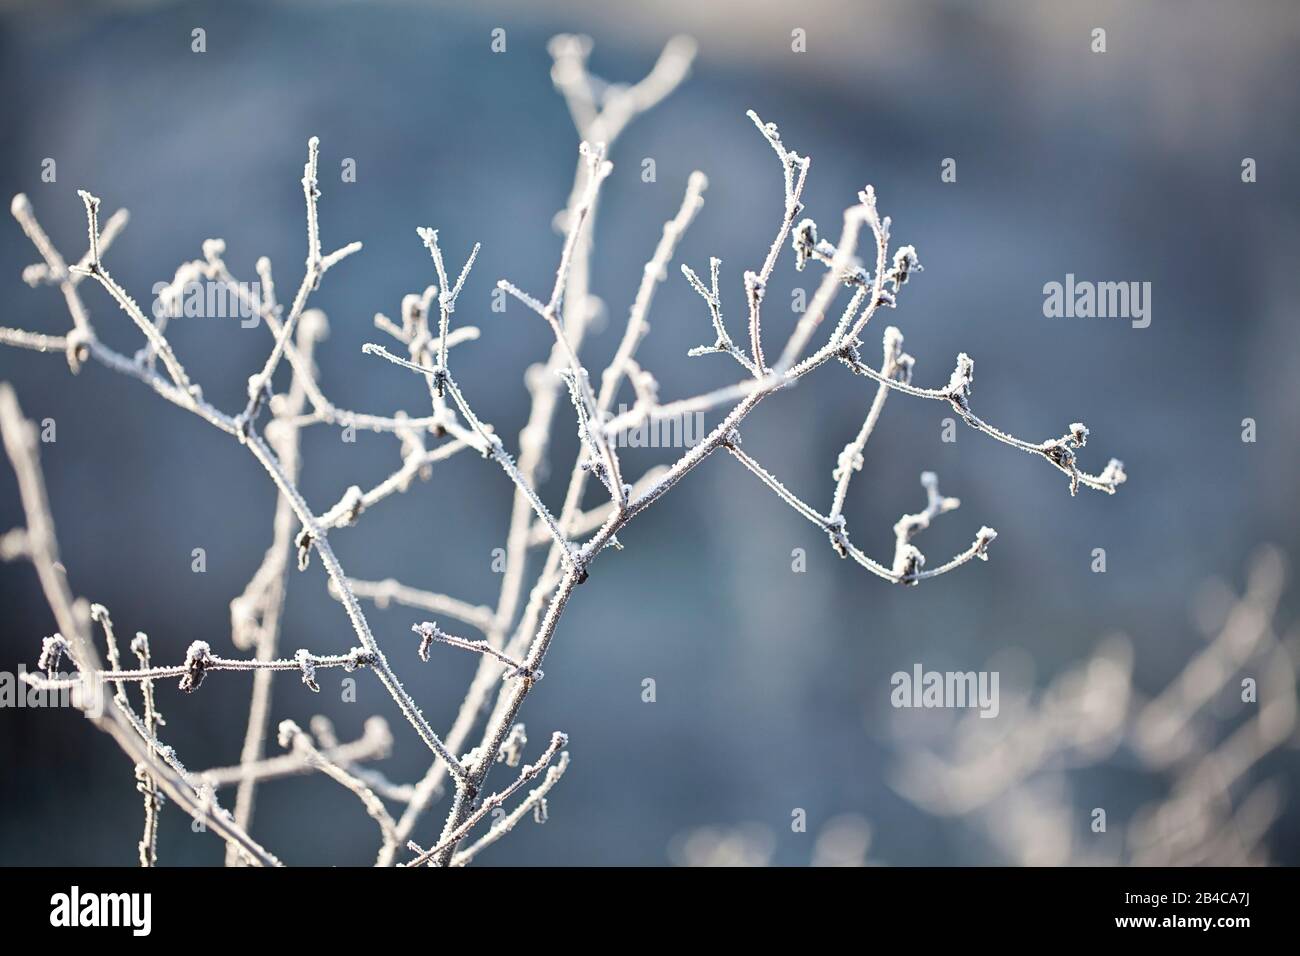 delicate twigs covered with hoarfrost on a cold winter morning acroos a blurry background Stock Photo